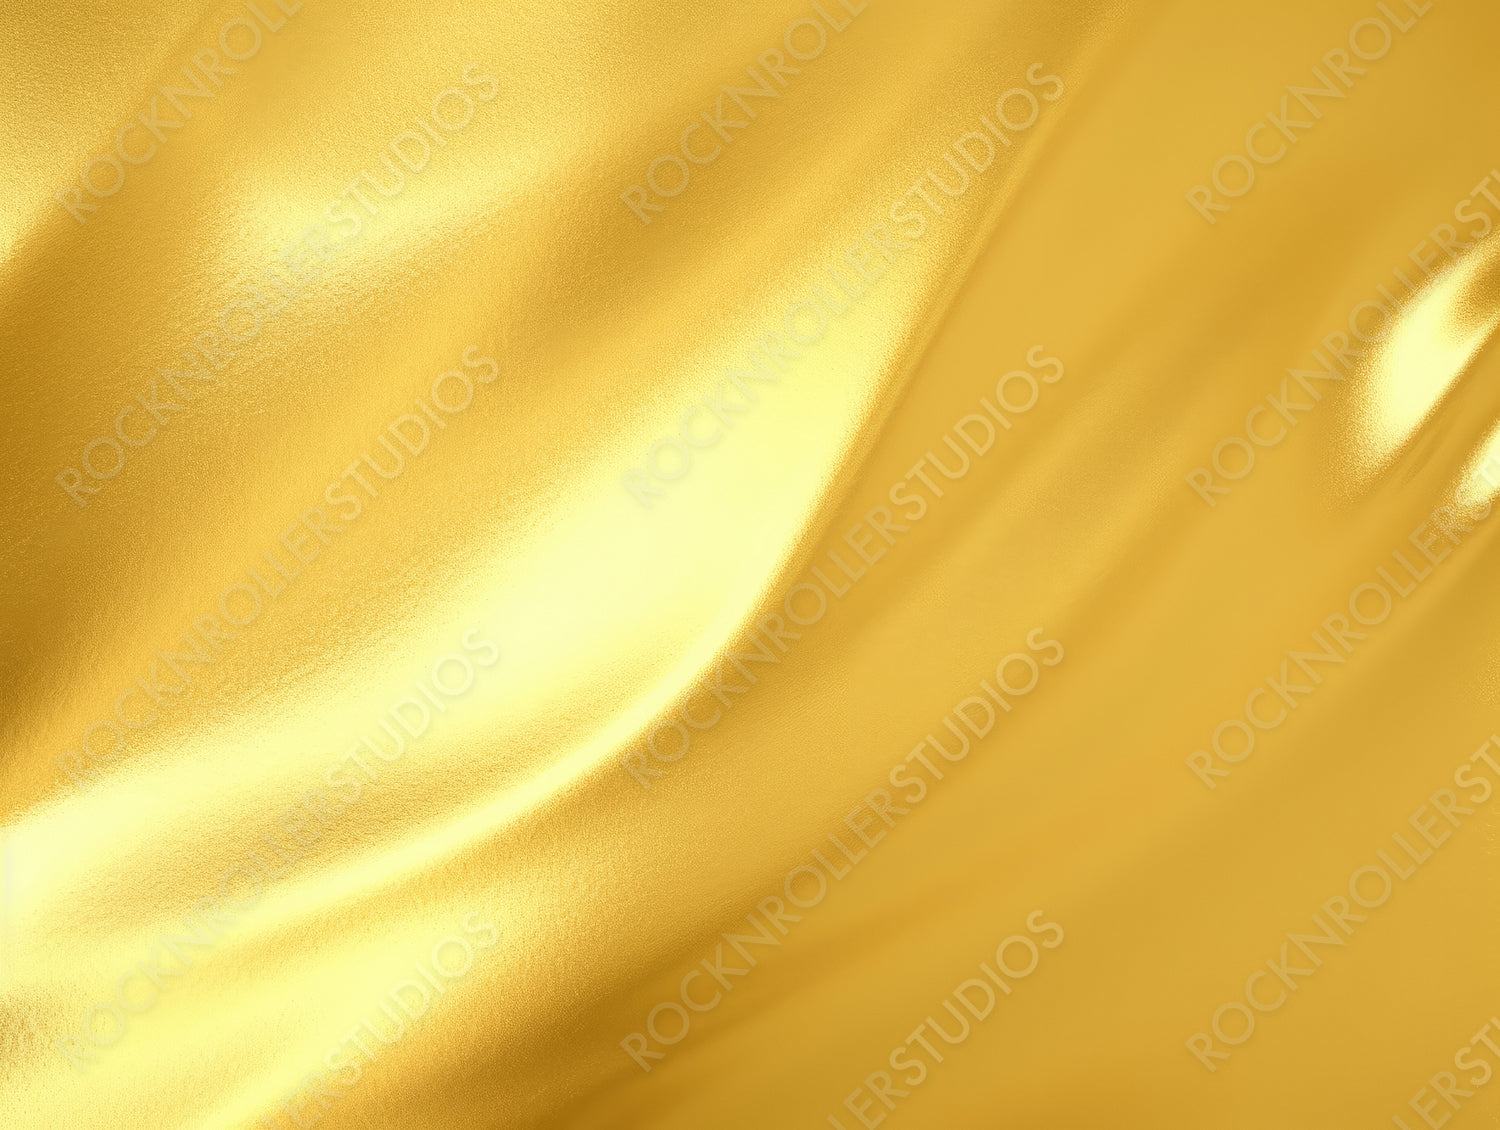 Gold Foil Background with Light Reflections